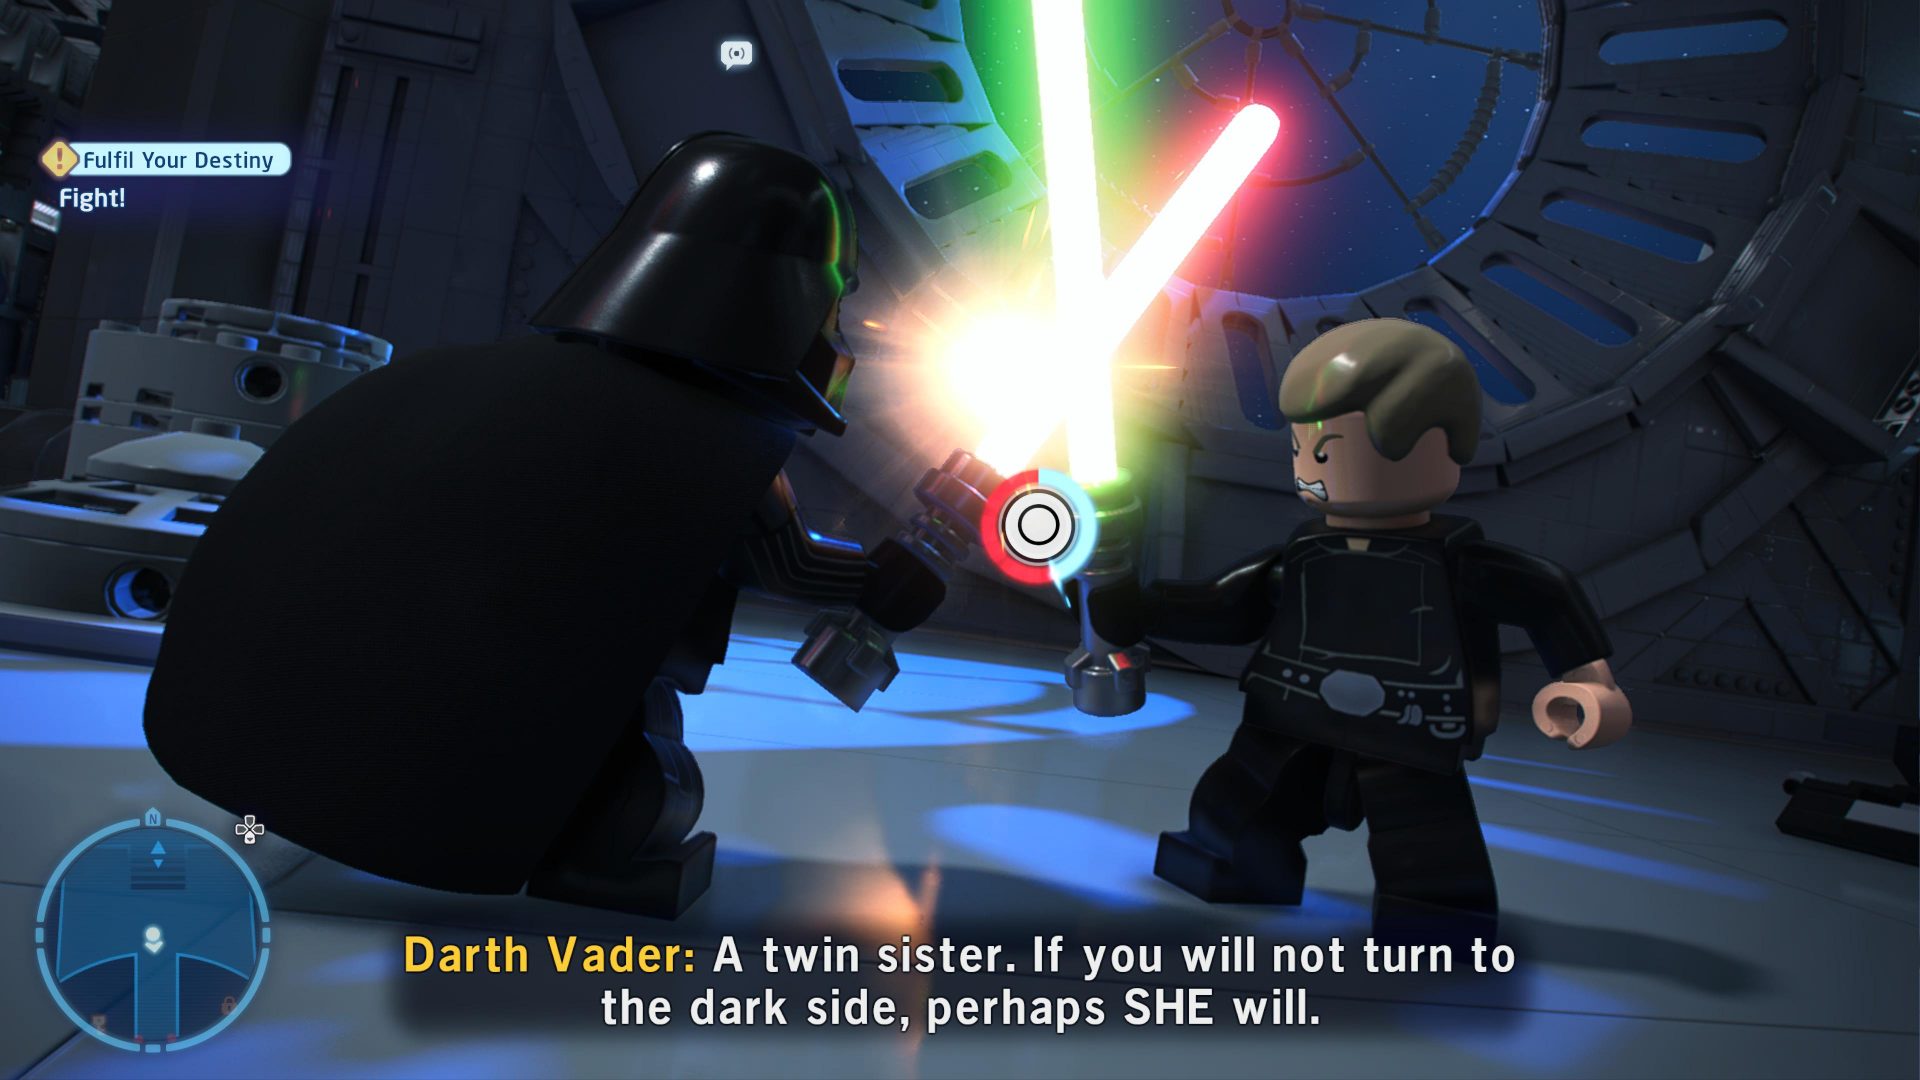 LEGO Star Wars: The Skywalker Saga Review - Feel The Co-Op Within You